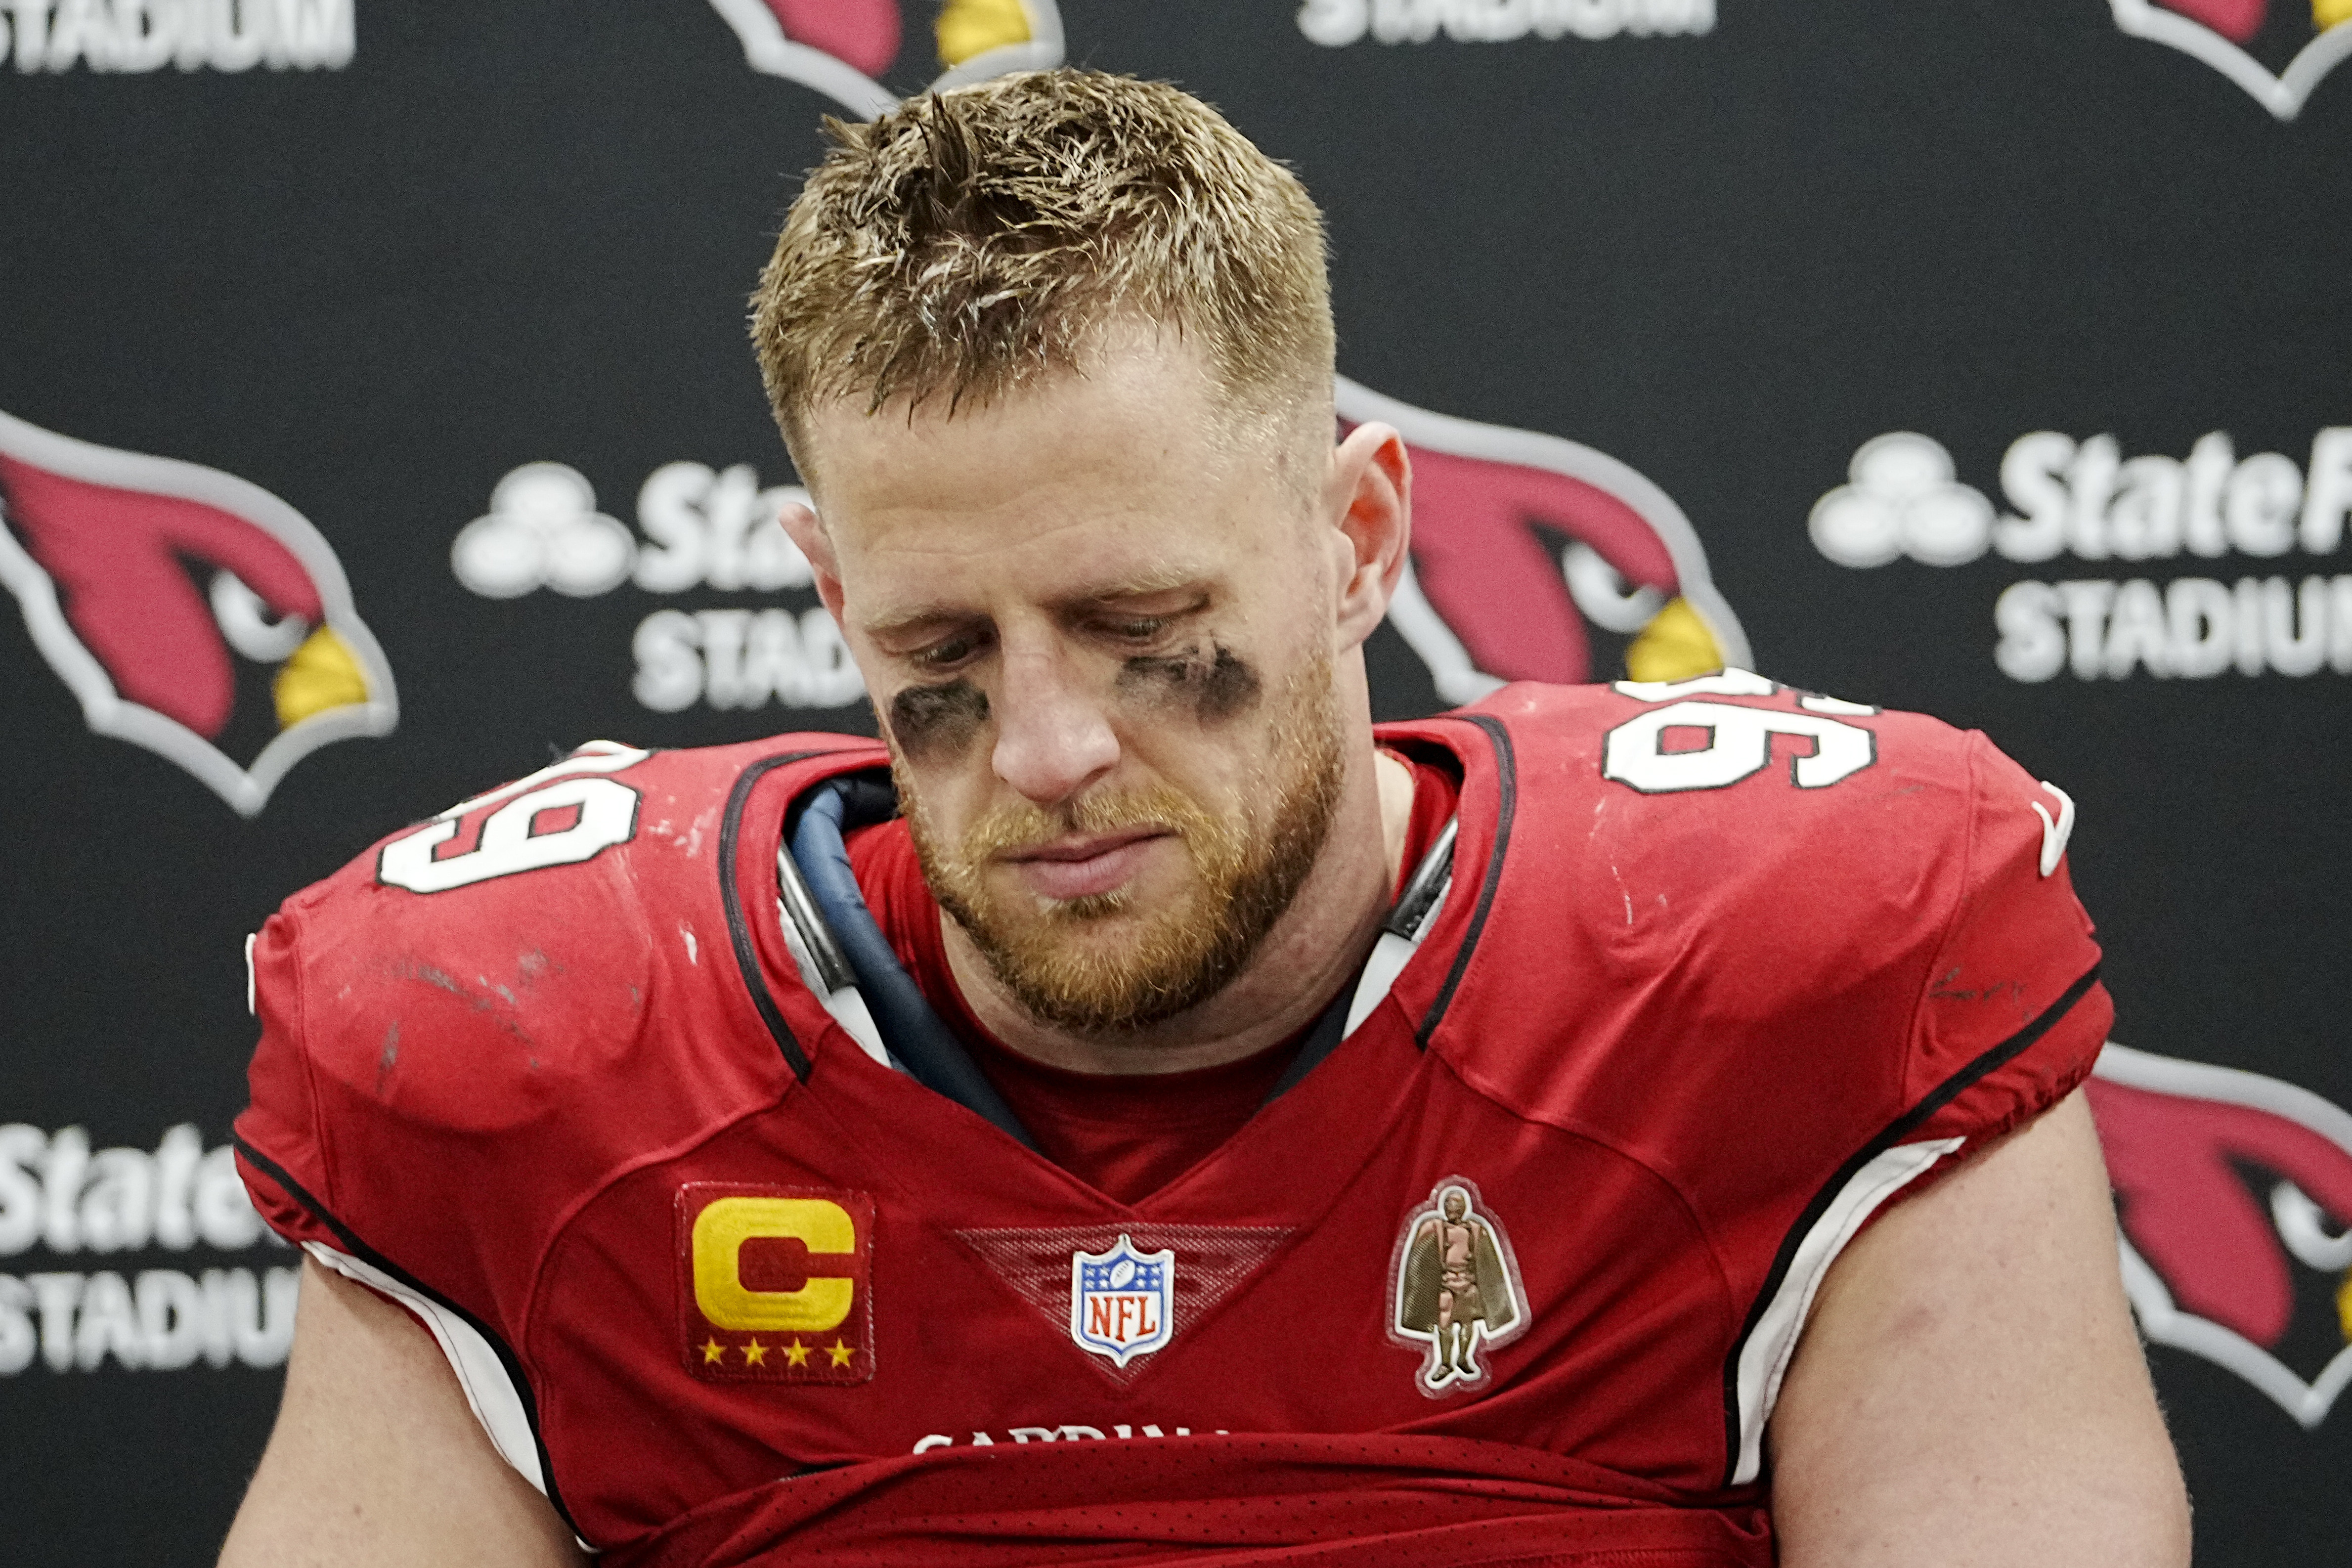 NFL players say J.J. Watt is the best NFL player. NFL players are